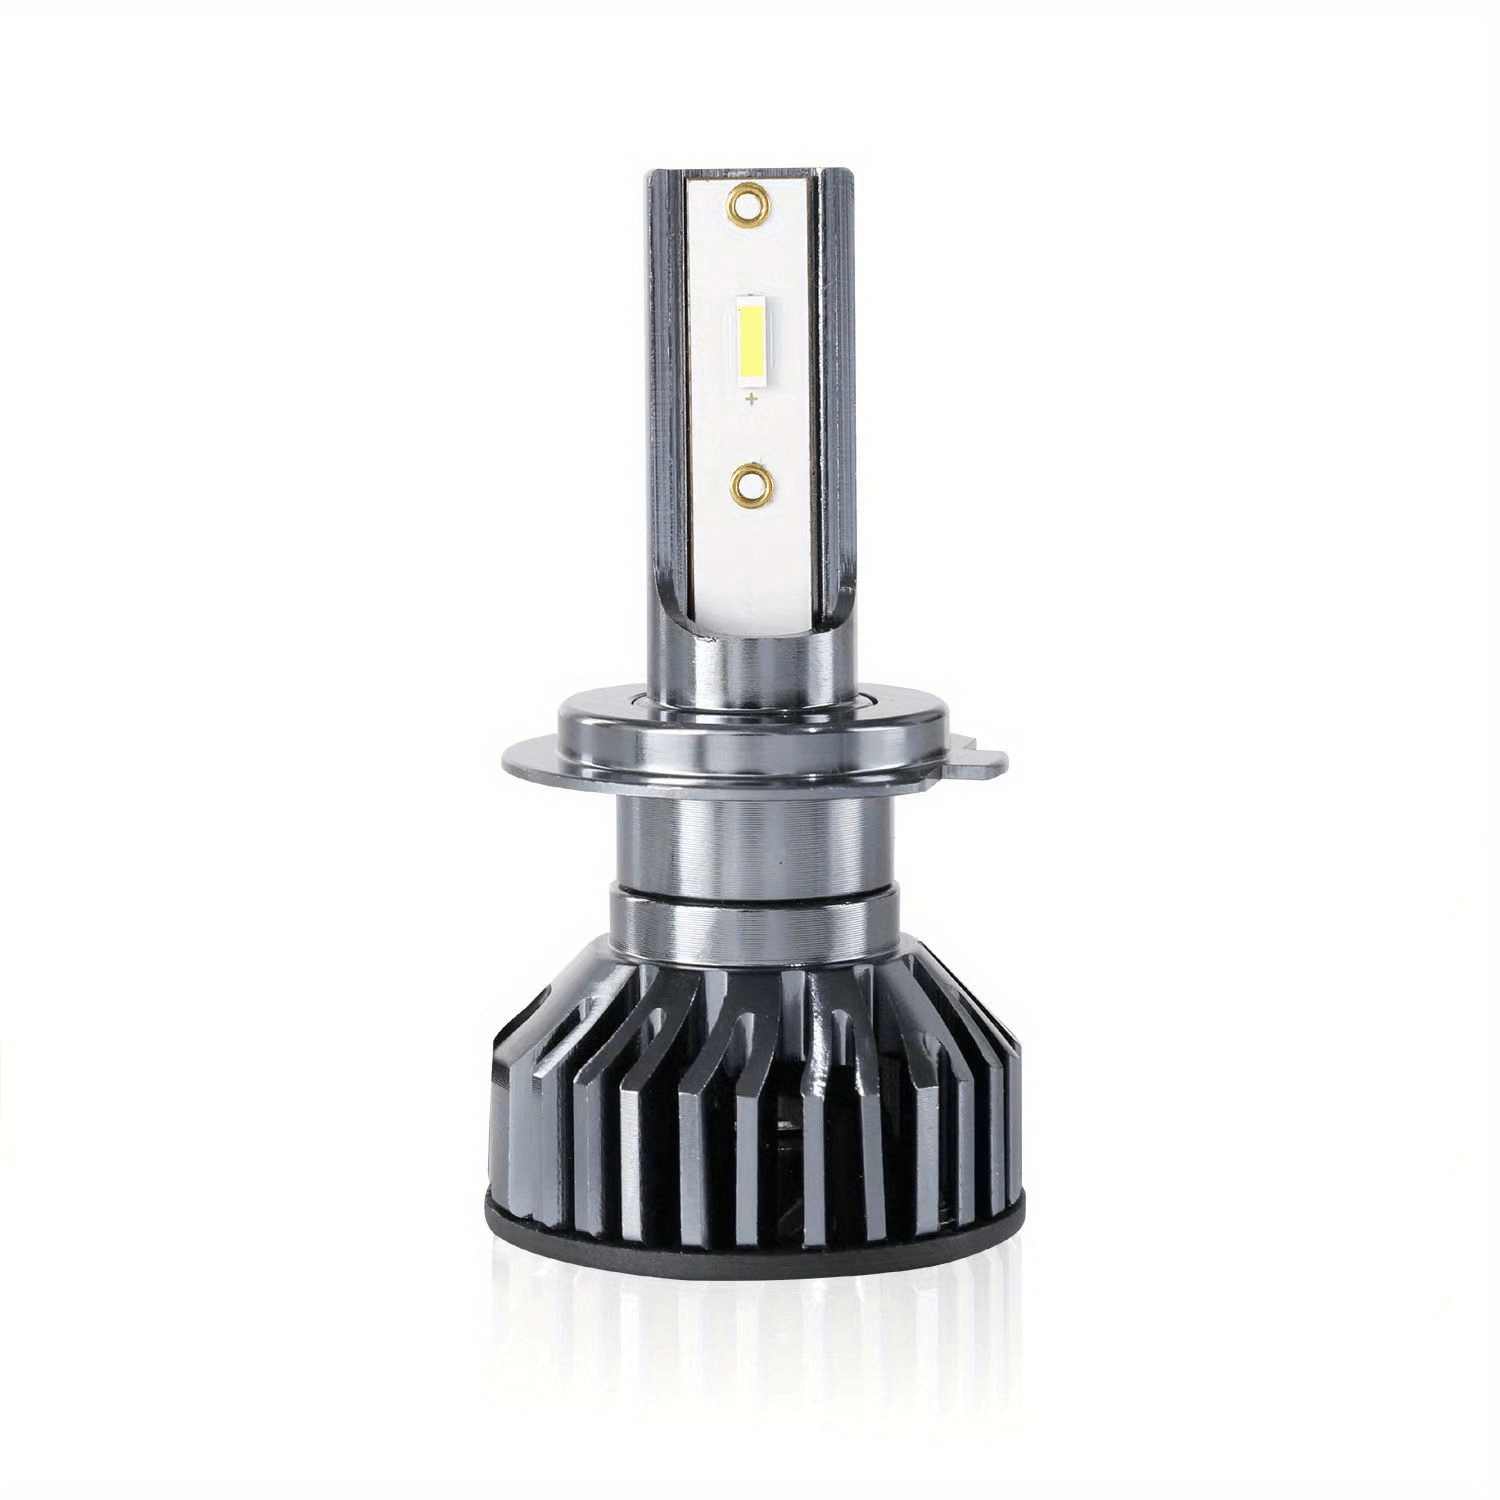 H1 LED Headlight Kit - 6000K 8000LM with Philips ZES Chips